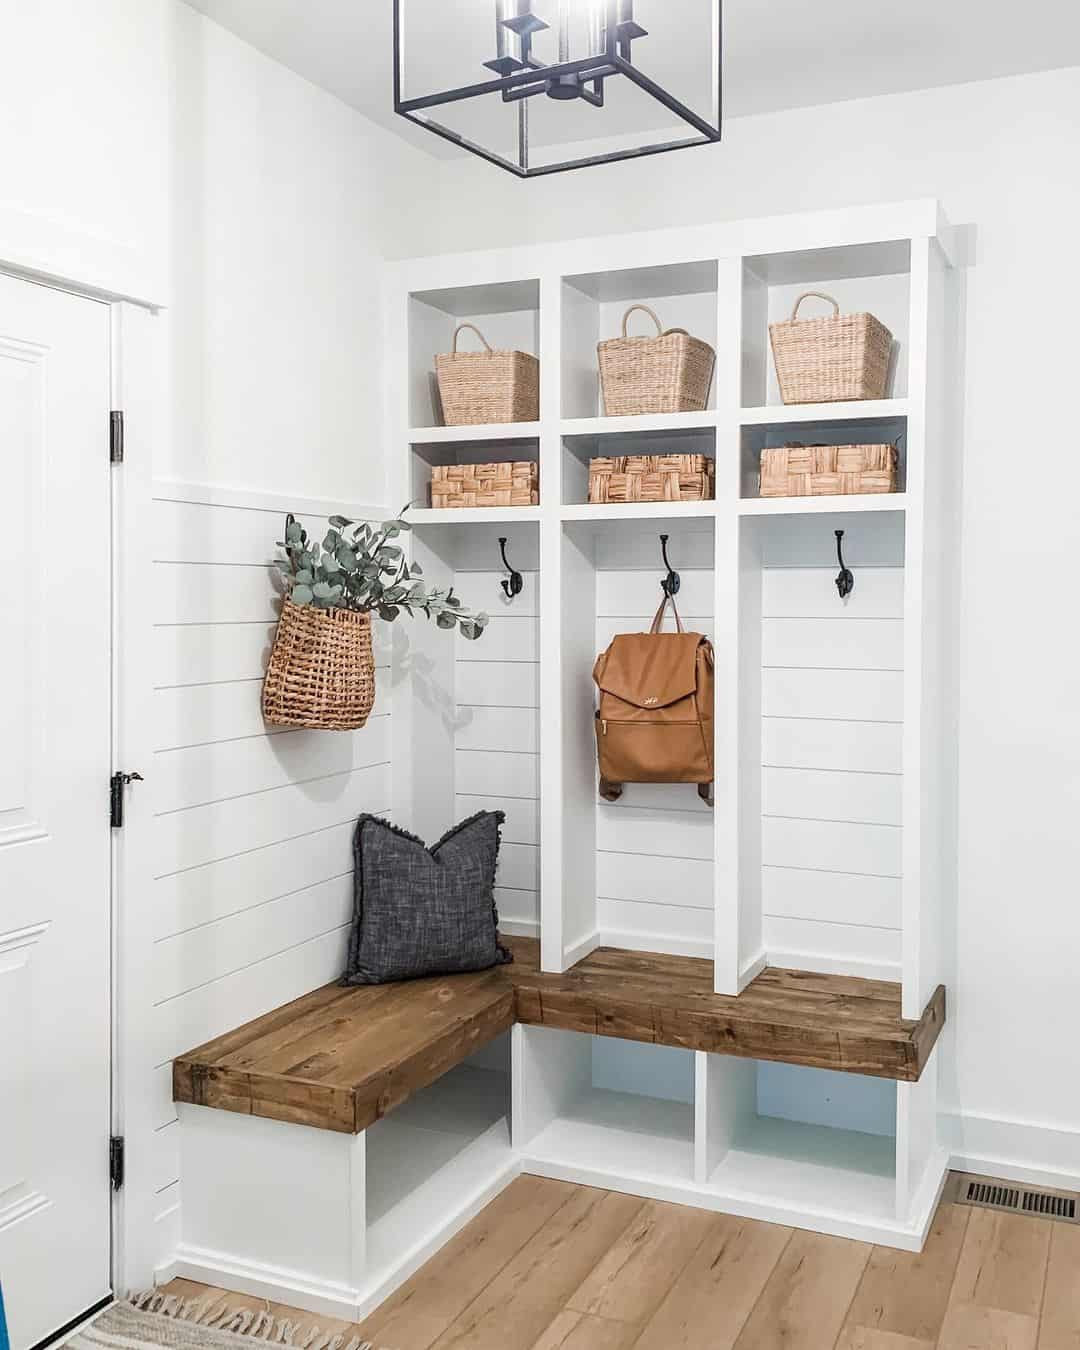 https://www.soulandlane.com/wp-content/uploads/2022/10/Black-Pillow-on-an-Entryway-Bench-With-Shoe-Storage.jpg